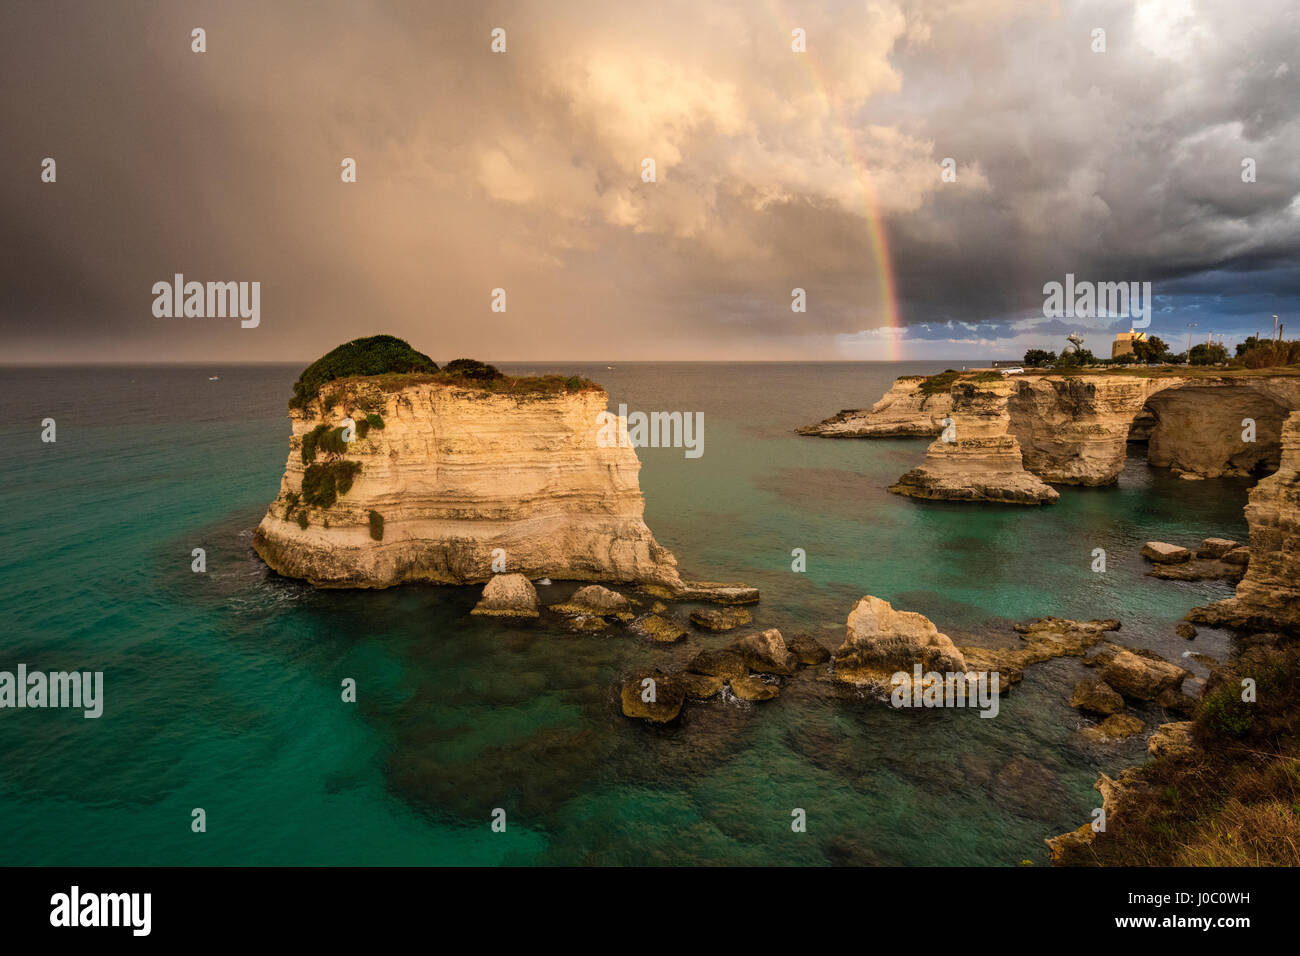 Rainbow frames rocky cliffs known as Faraglioni di Sant'andrea surrounded by turquoise sea, province of Lecce, Apulia, Italy Stock Photo